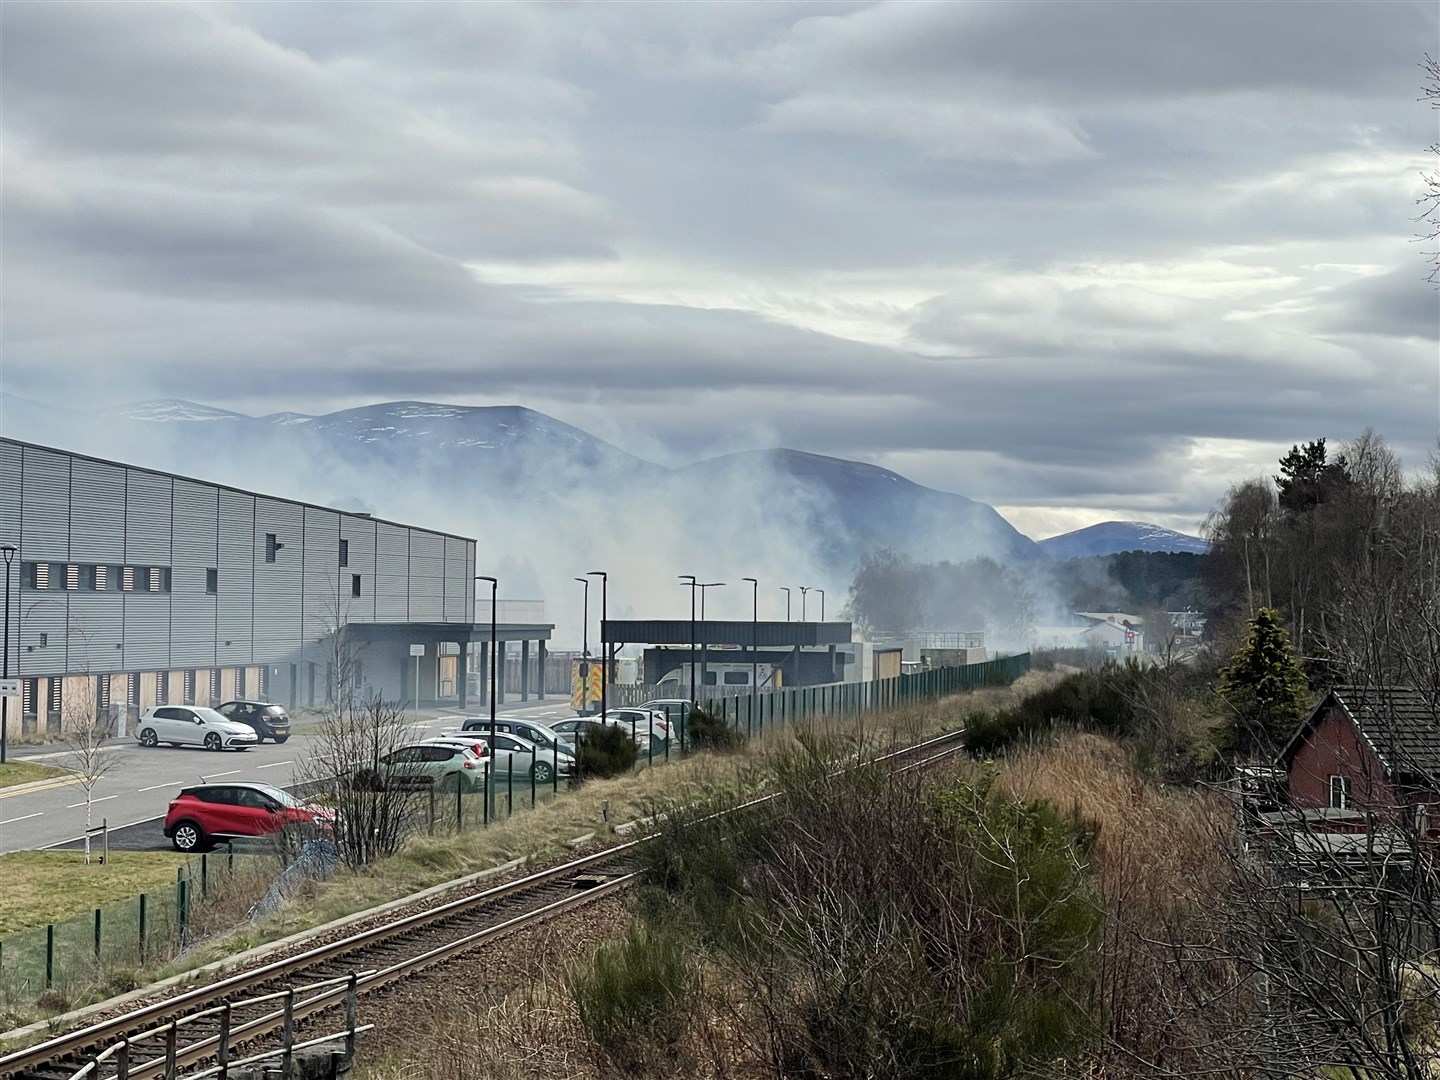 Smoke billows across the from steam railway to mainline yesterday afternoon, over the community hospital buildings along the way.